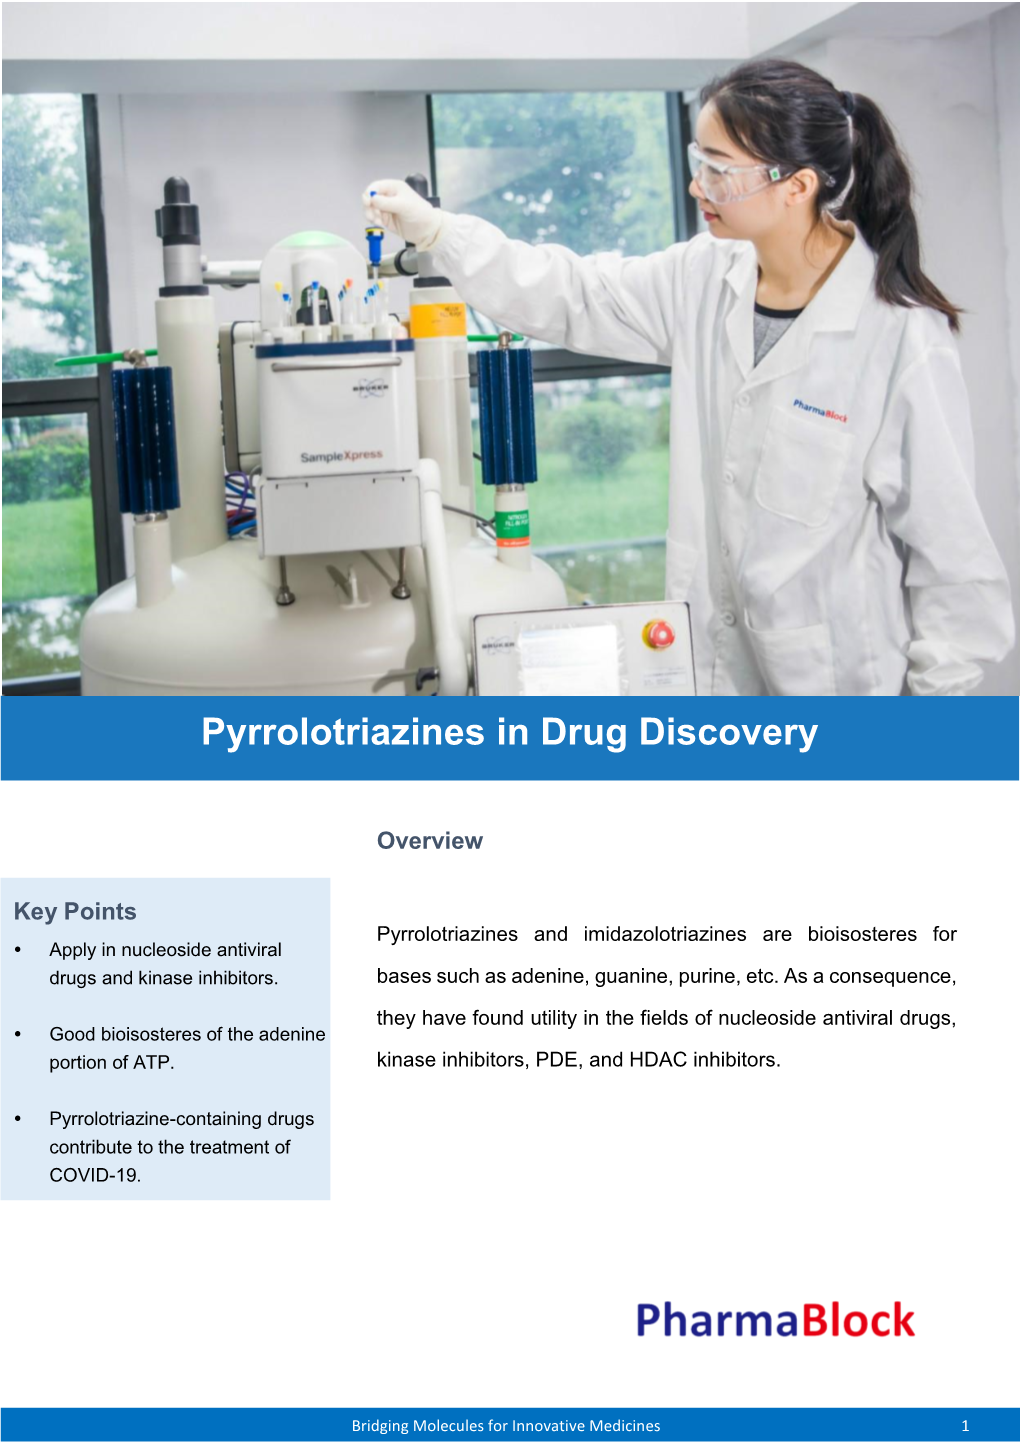 Pyrrolotriazines in Drug Discovery